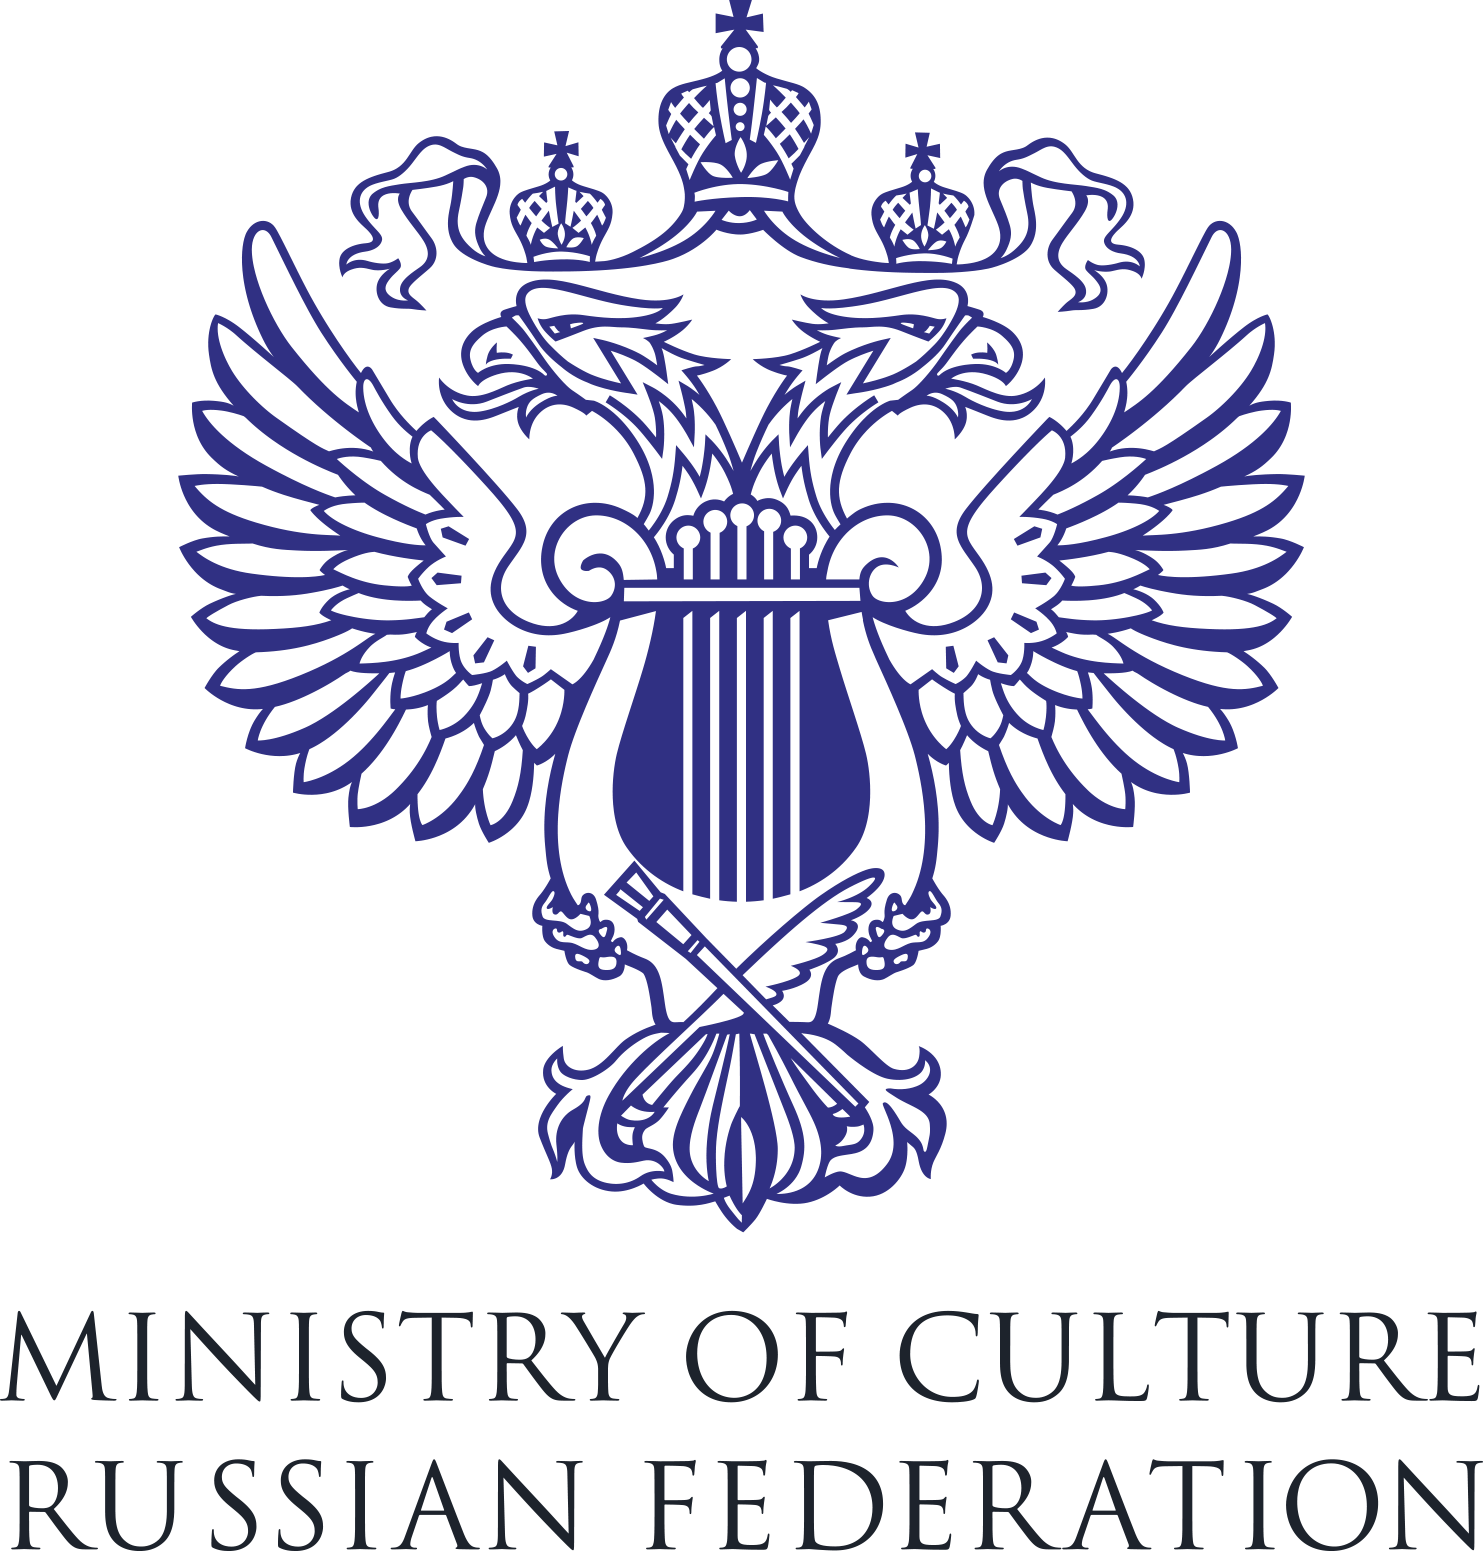 Ministry of Culture